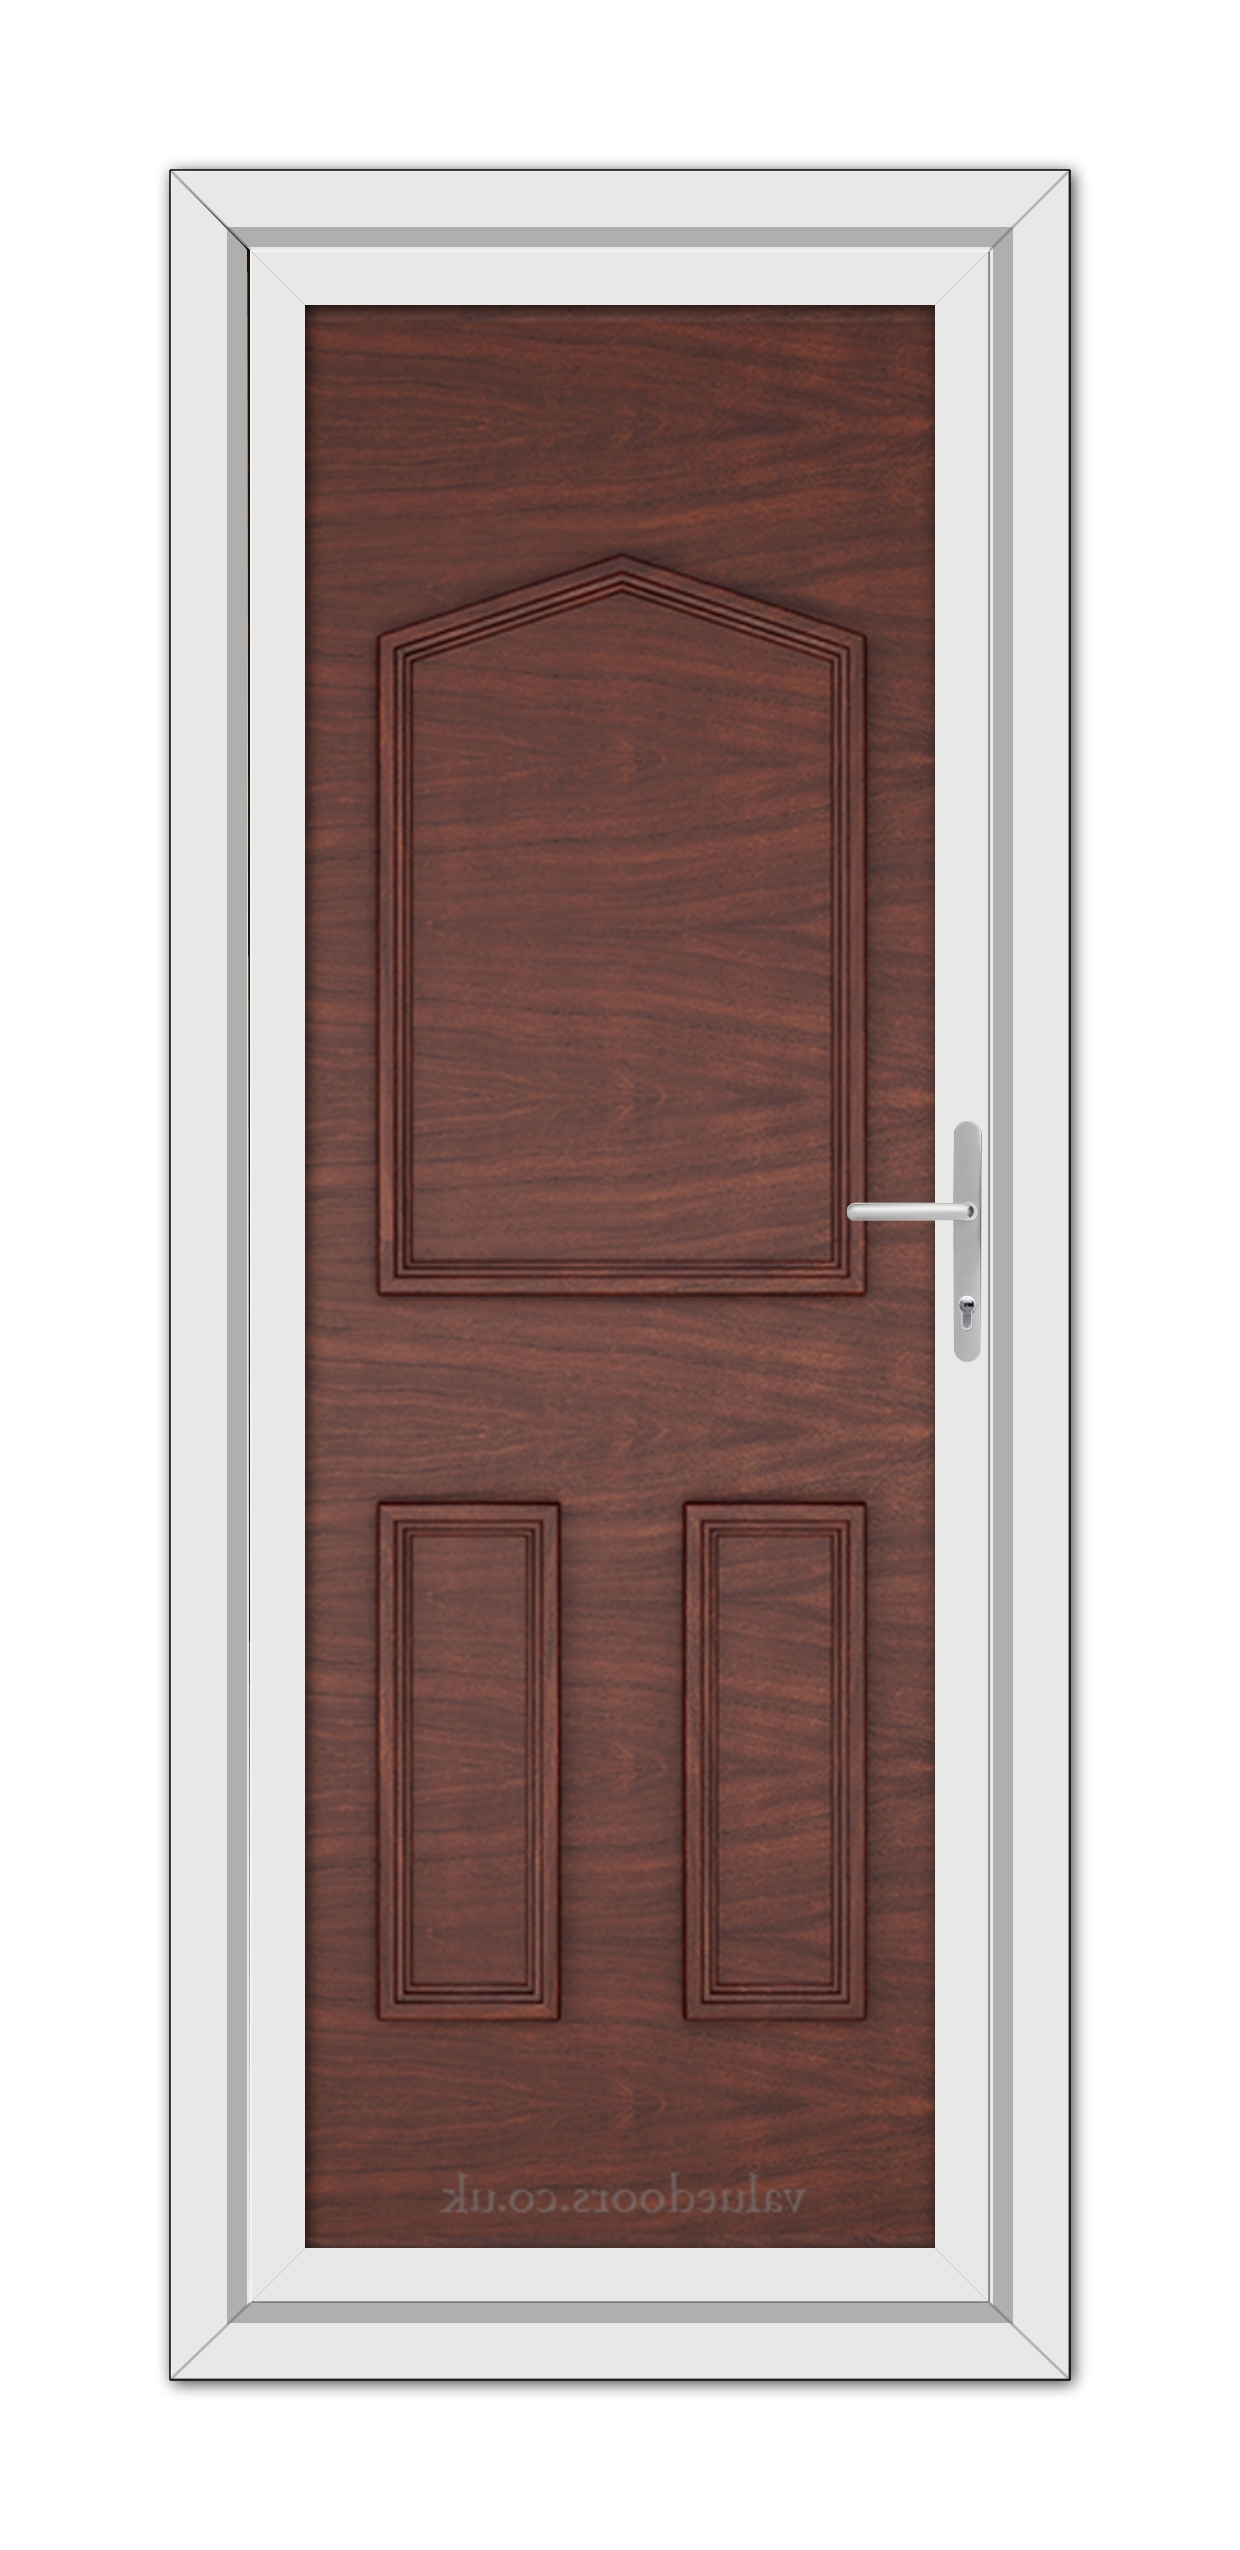 A Rosewood Oxford Solid uPVC Door with a white frame and stainless steel handle, featuring three panels with decorative embossed designs.